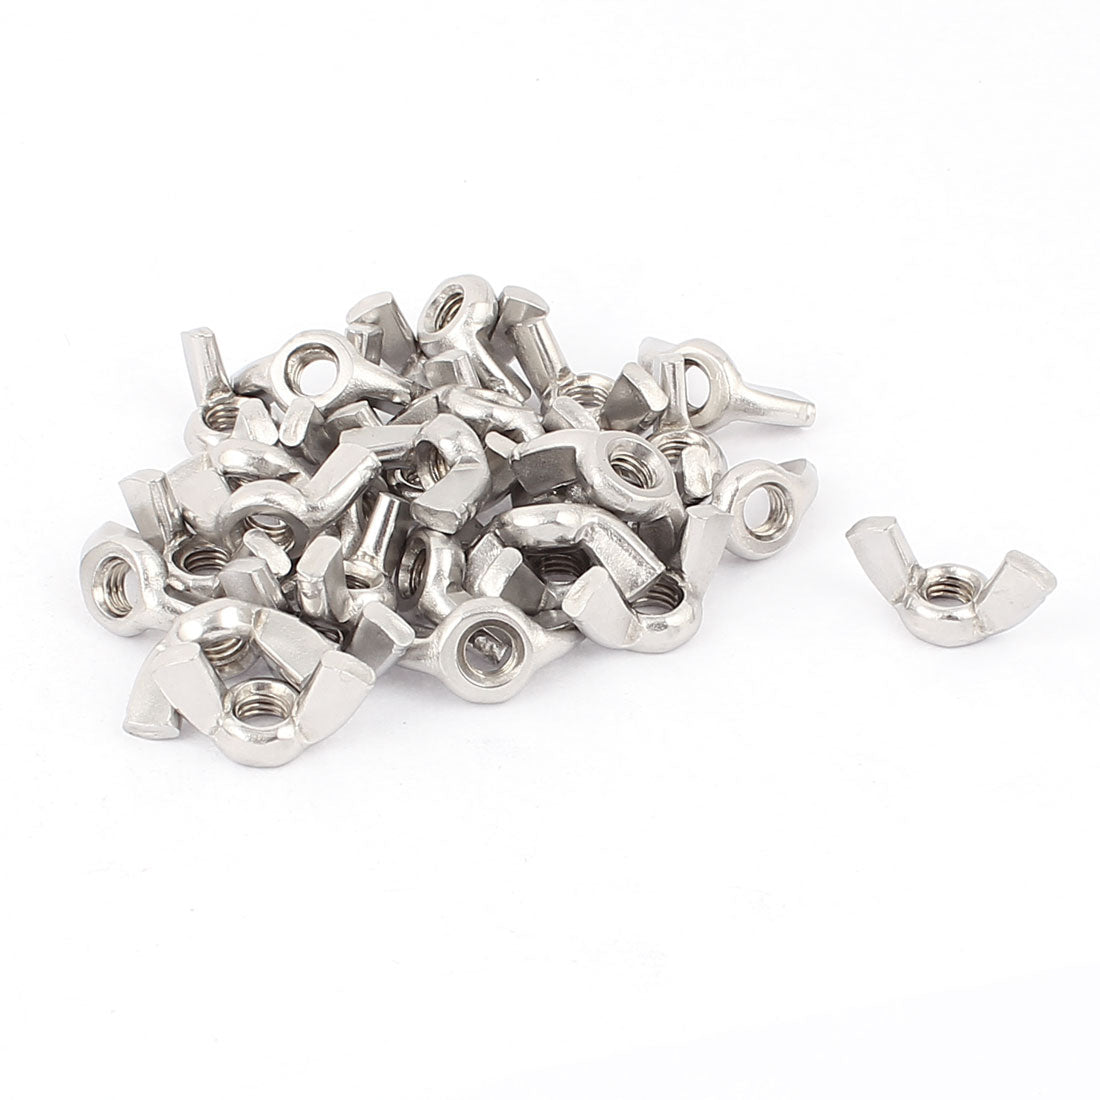 uxcell Uxcell 30pcs M6 6mm Stainless Steel Wingnuts Butterfly Wing Nut Silver Tone